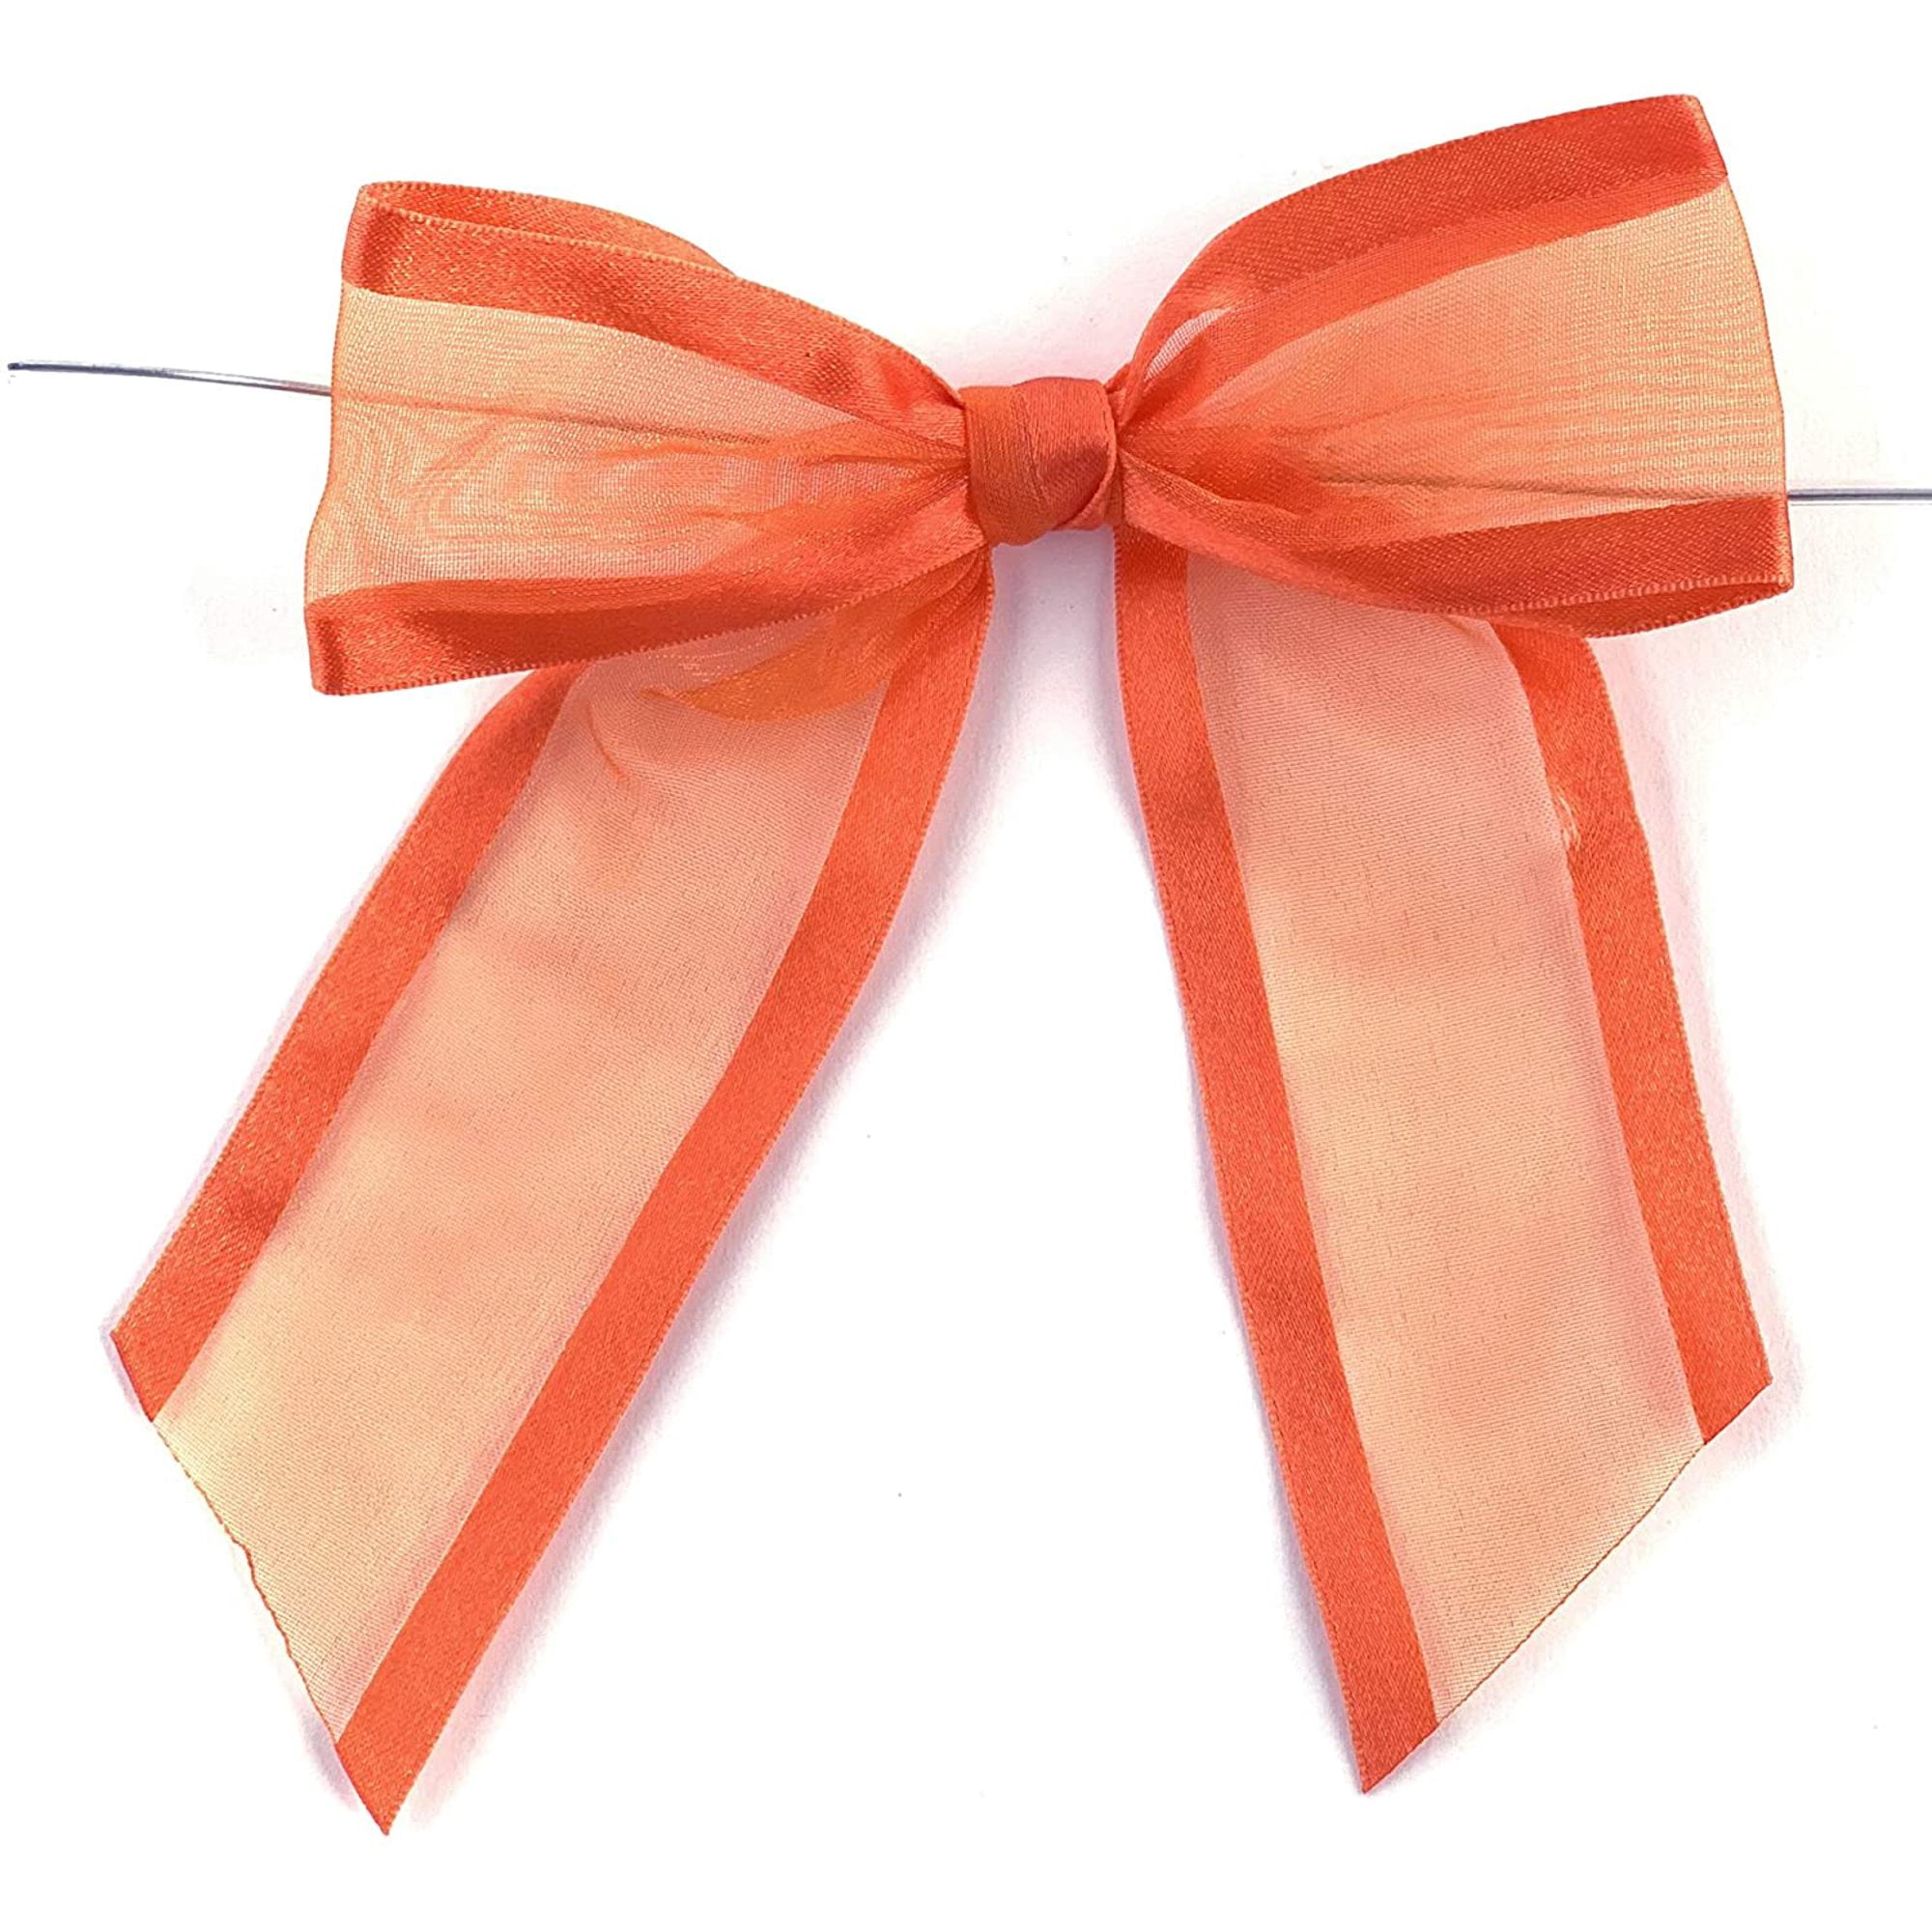 7/8 x 9' Valentine's Day Hearts on Red Satin Ribbon - Valentine's Day Ribbons & Bows - Seasons & Occasions